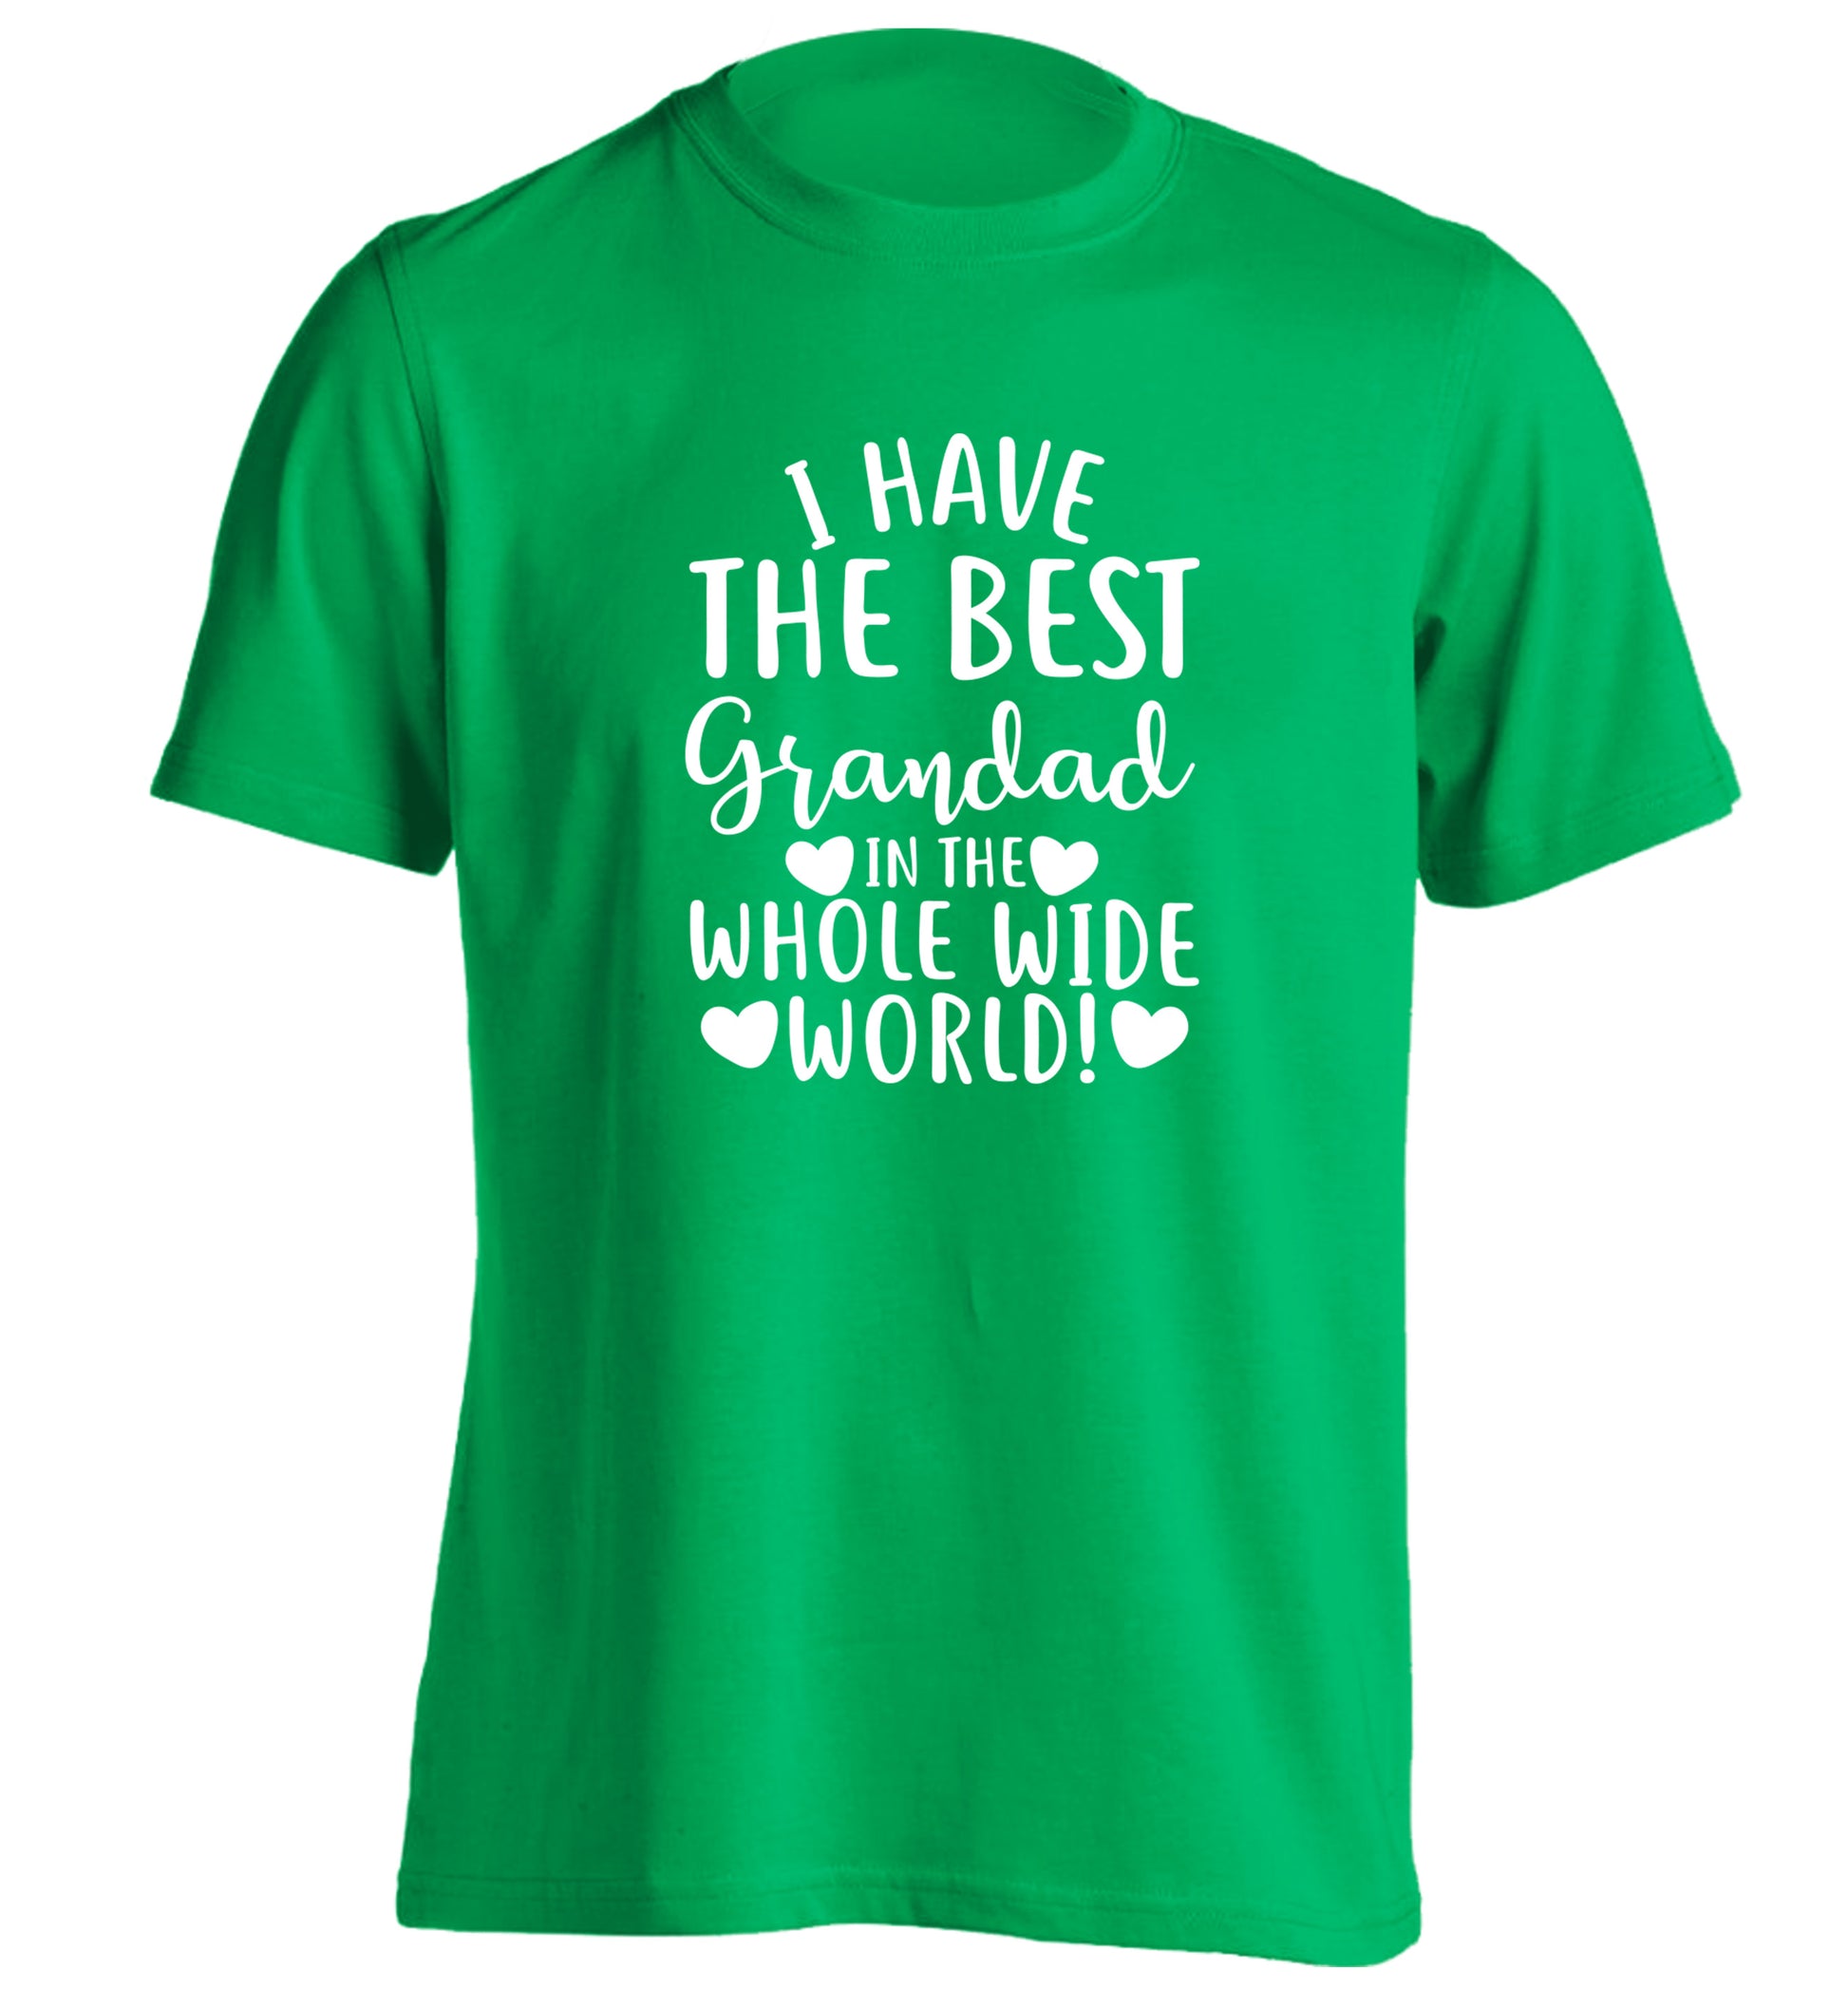 I have the best grandad in the whole wide world! adults unisex green Tshirt 2XL